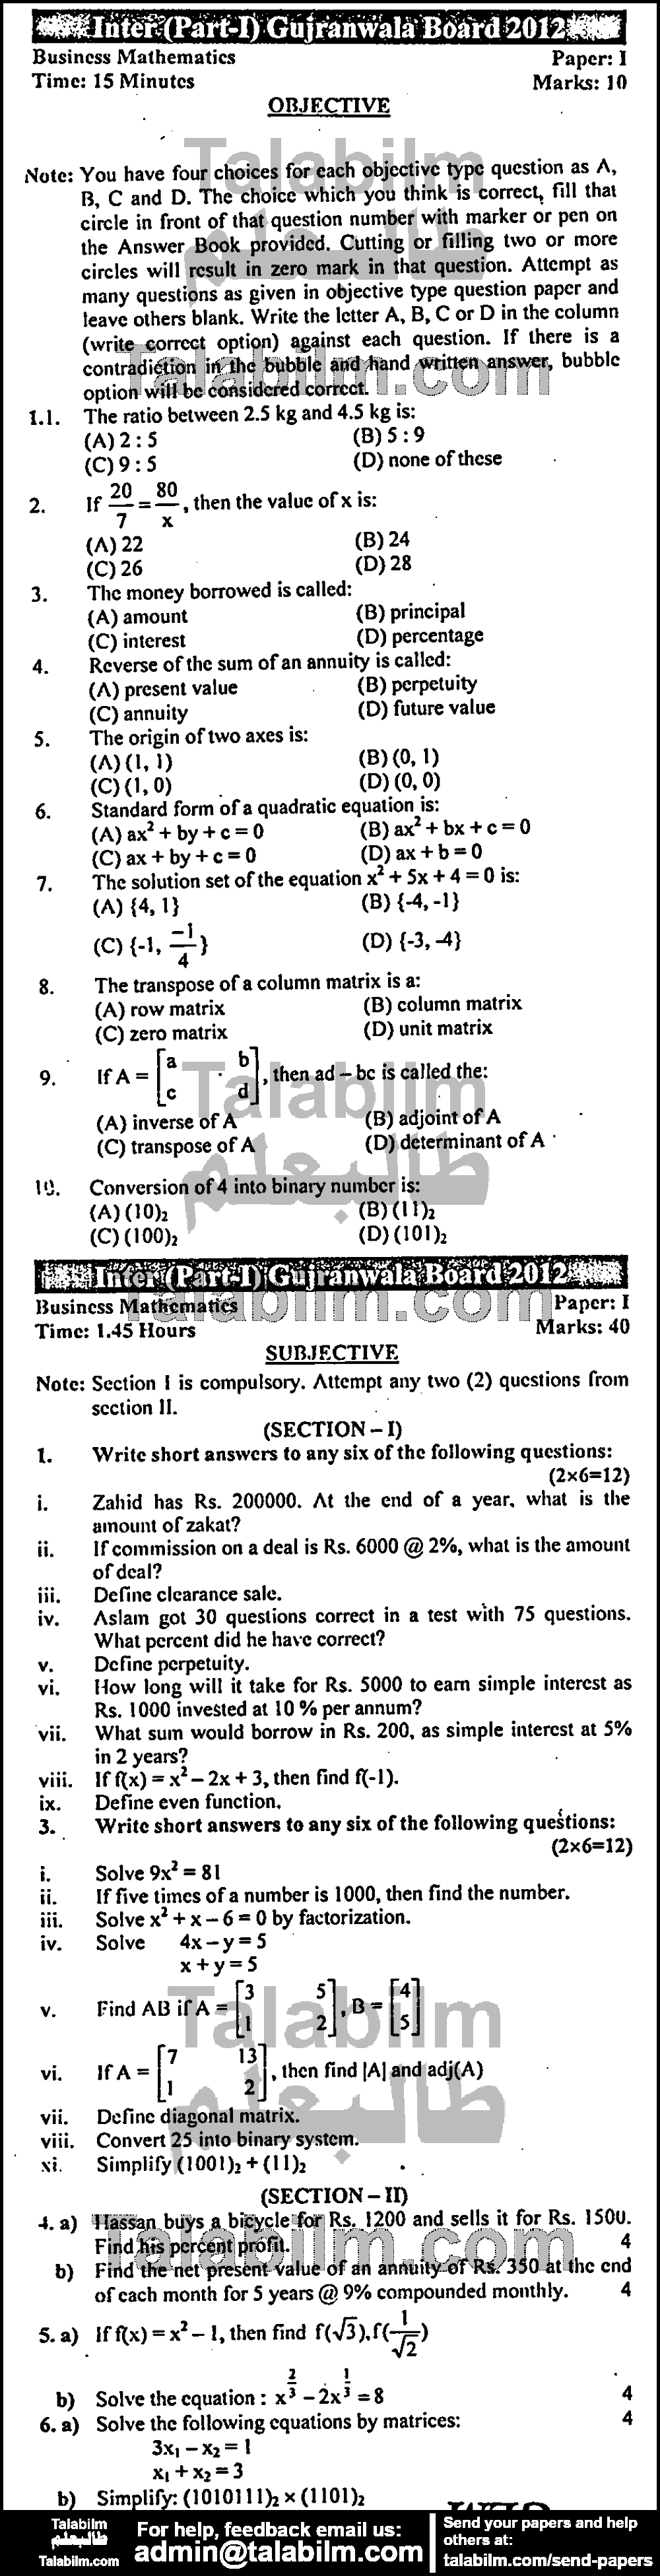 Business Mathematics 0 past paper for Group-I 2012